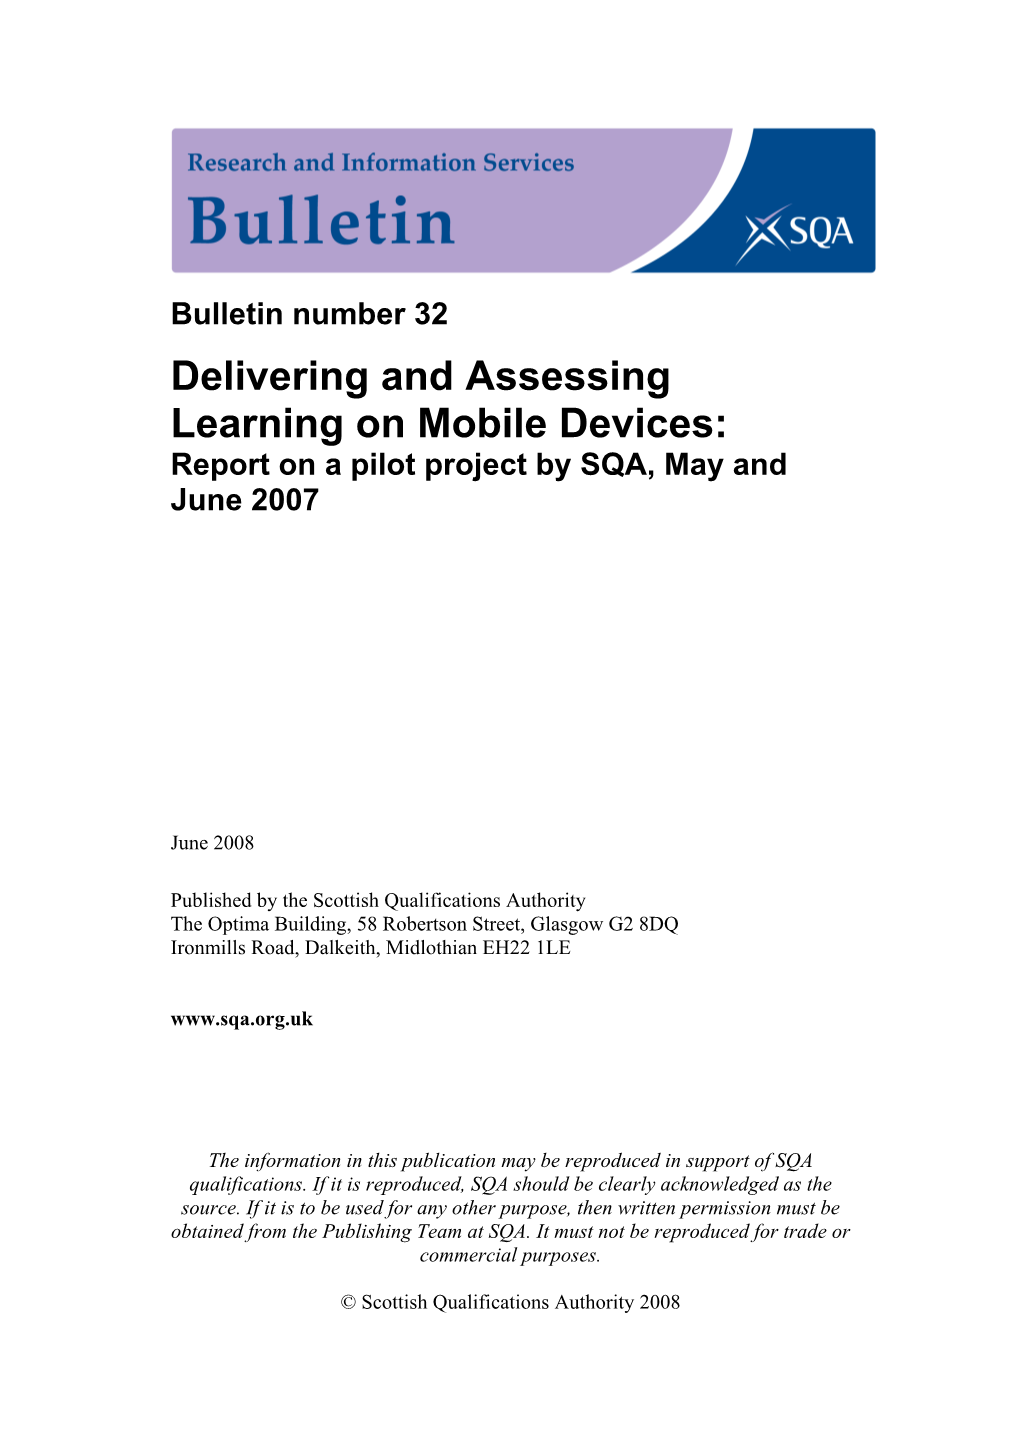 Delivering and Assessing Learning on Mobile Devices: Report on a Pilot Project by SQA, May and June 2007